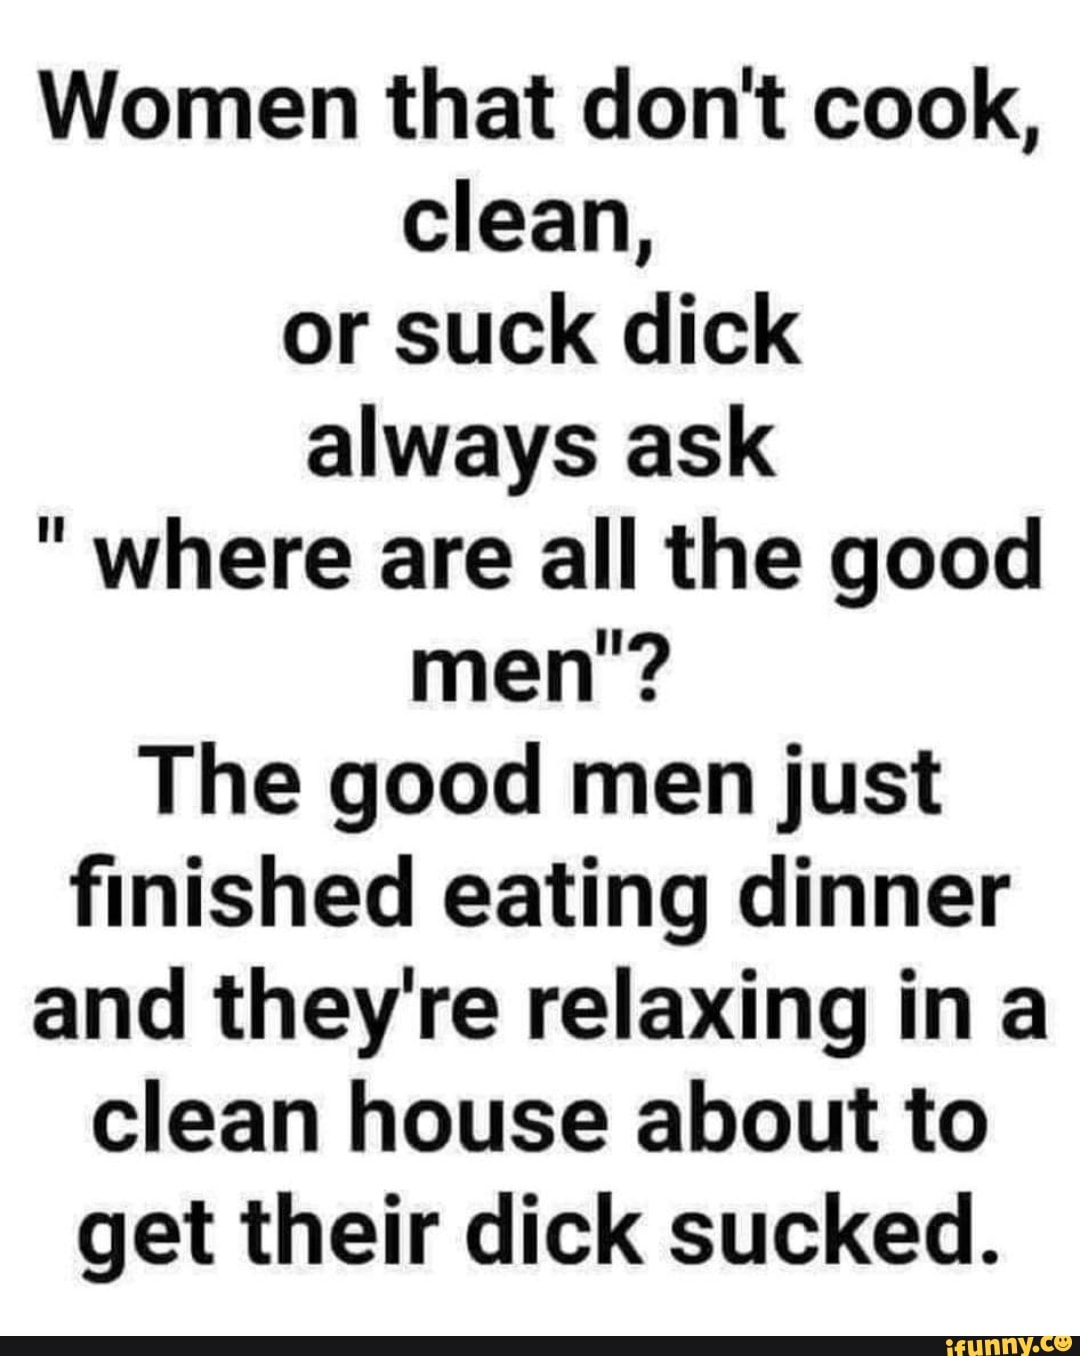 cook, clean, or suck dick